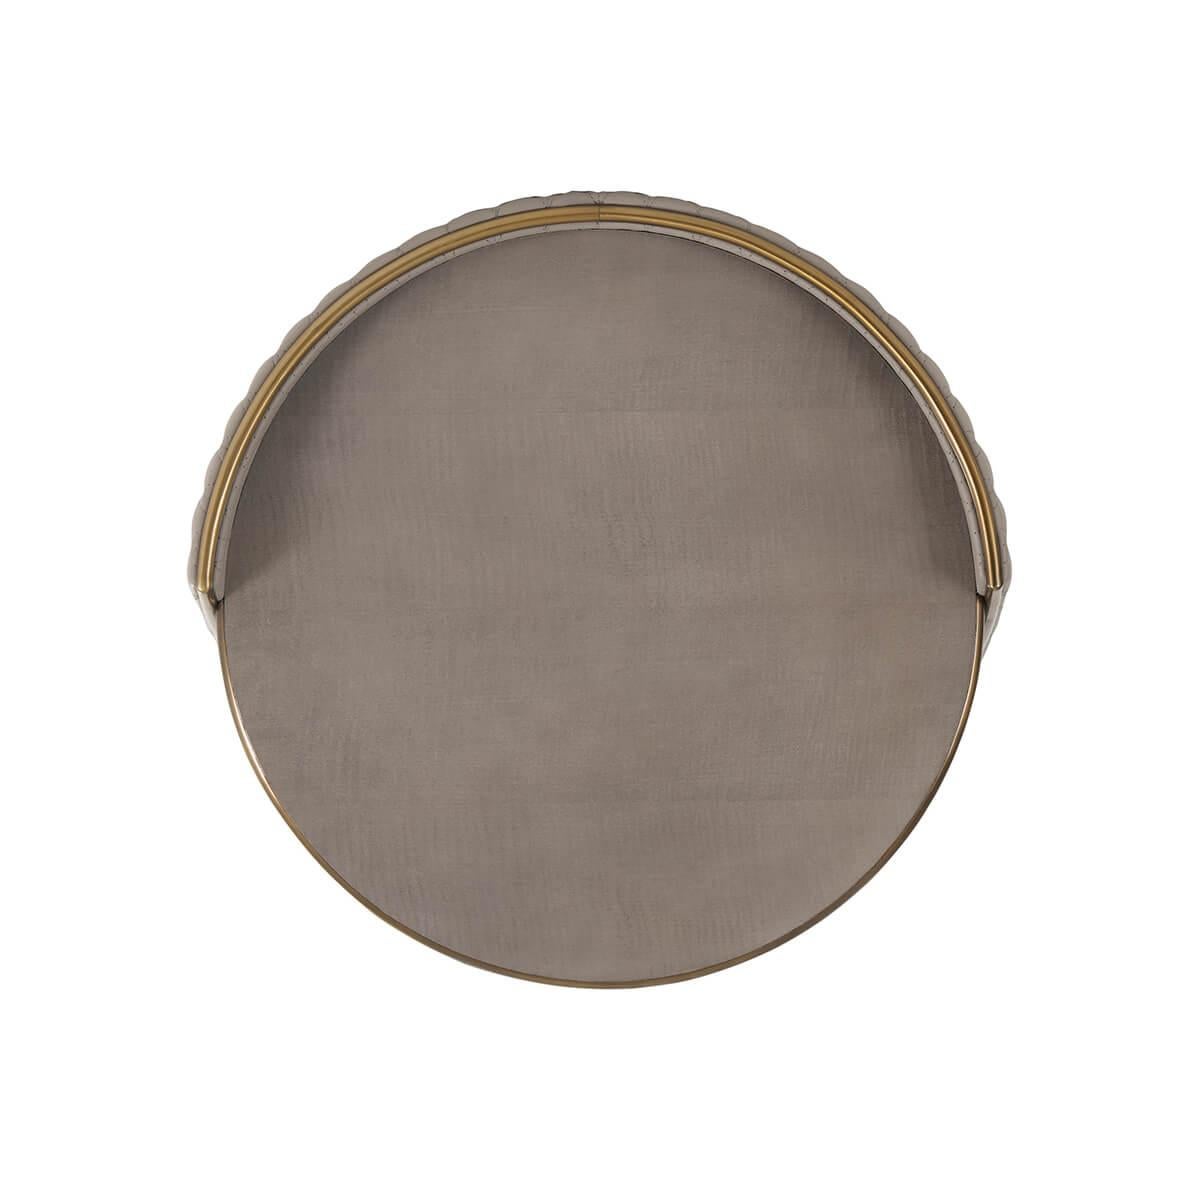 Crafted with a circular grey fiddle back sycamore top and undertier, adorned with a bronze finish molding. Its geometric quilted leather-wrapped 'collar' support adds a touch of sophistication, complemented by similar molding for a cohesive